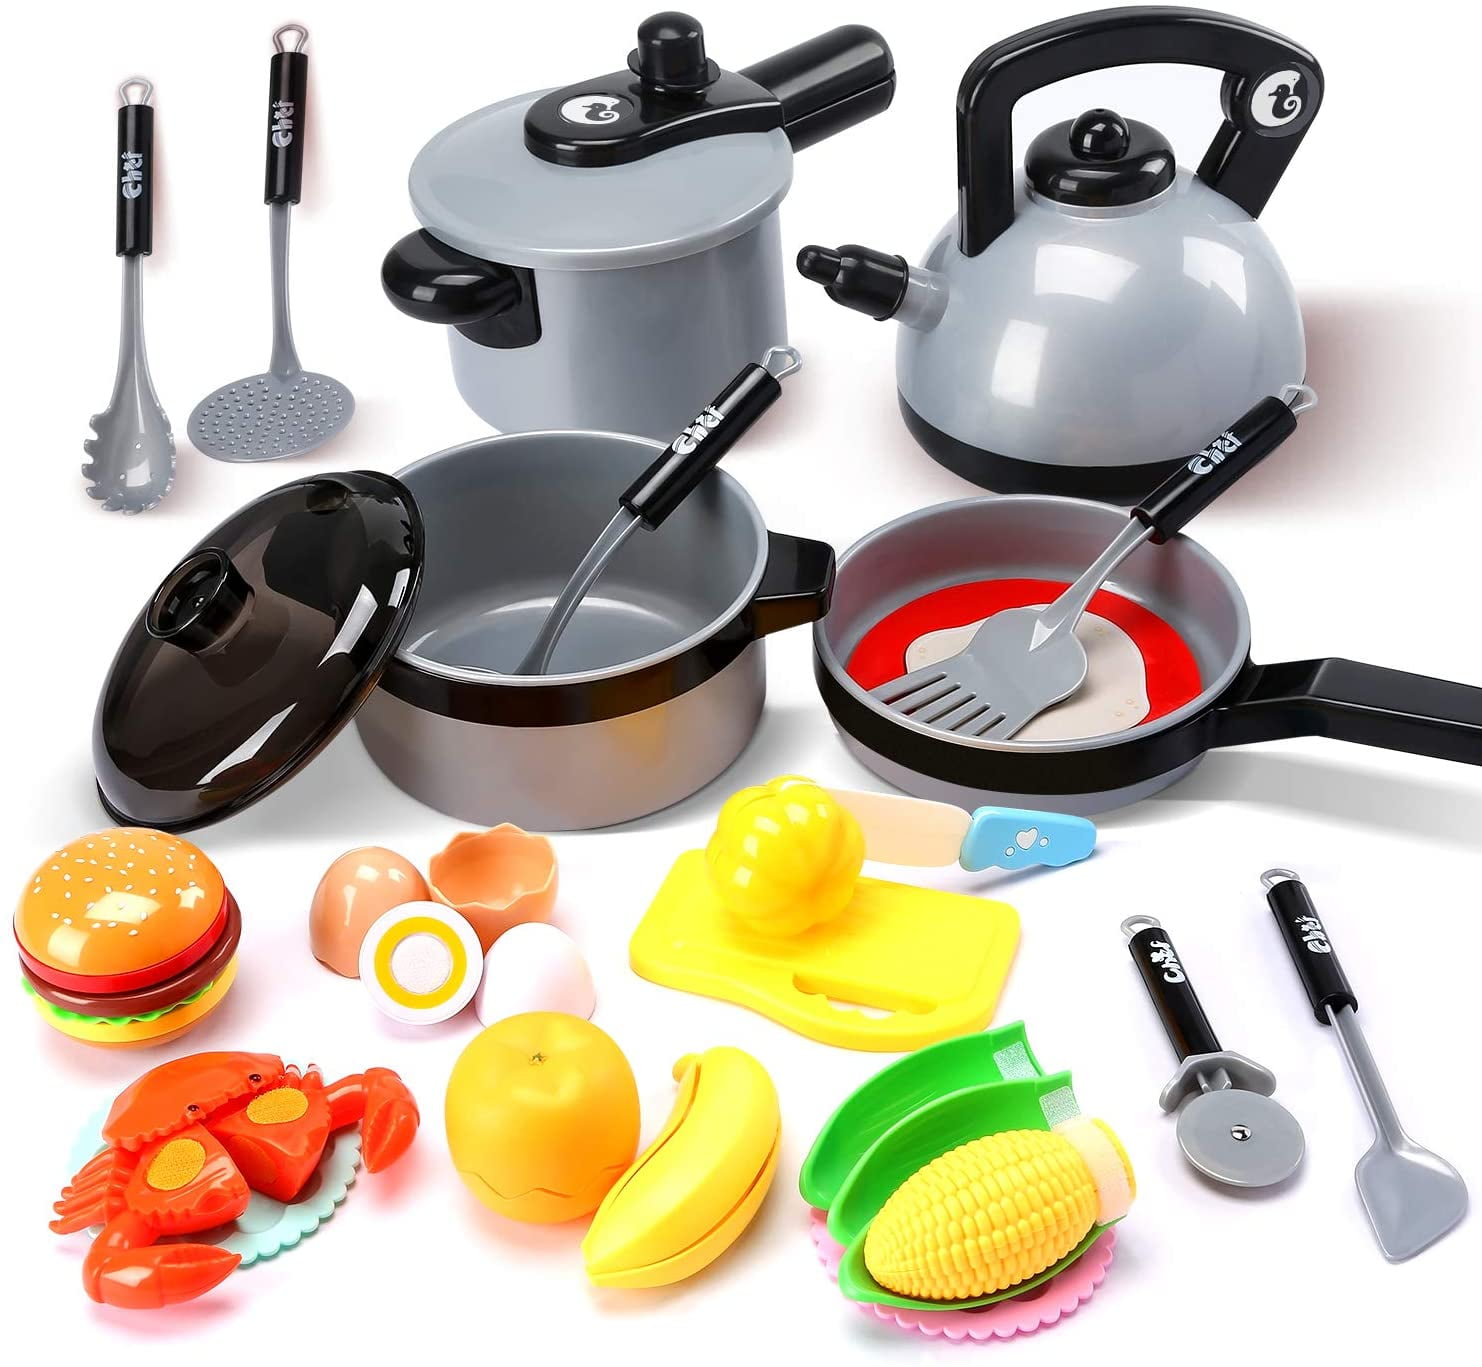 Kids Kitchen Toys Cooking Utensils Pots Pan Food Play House Toy Miniature Tools 